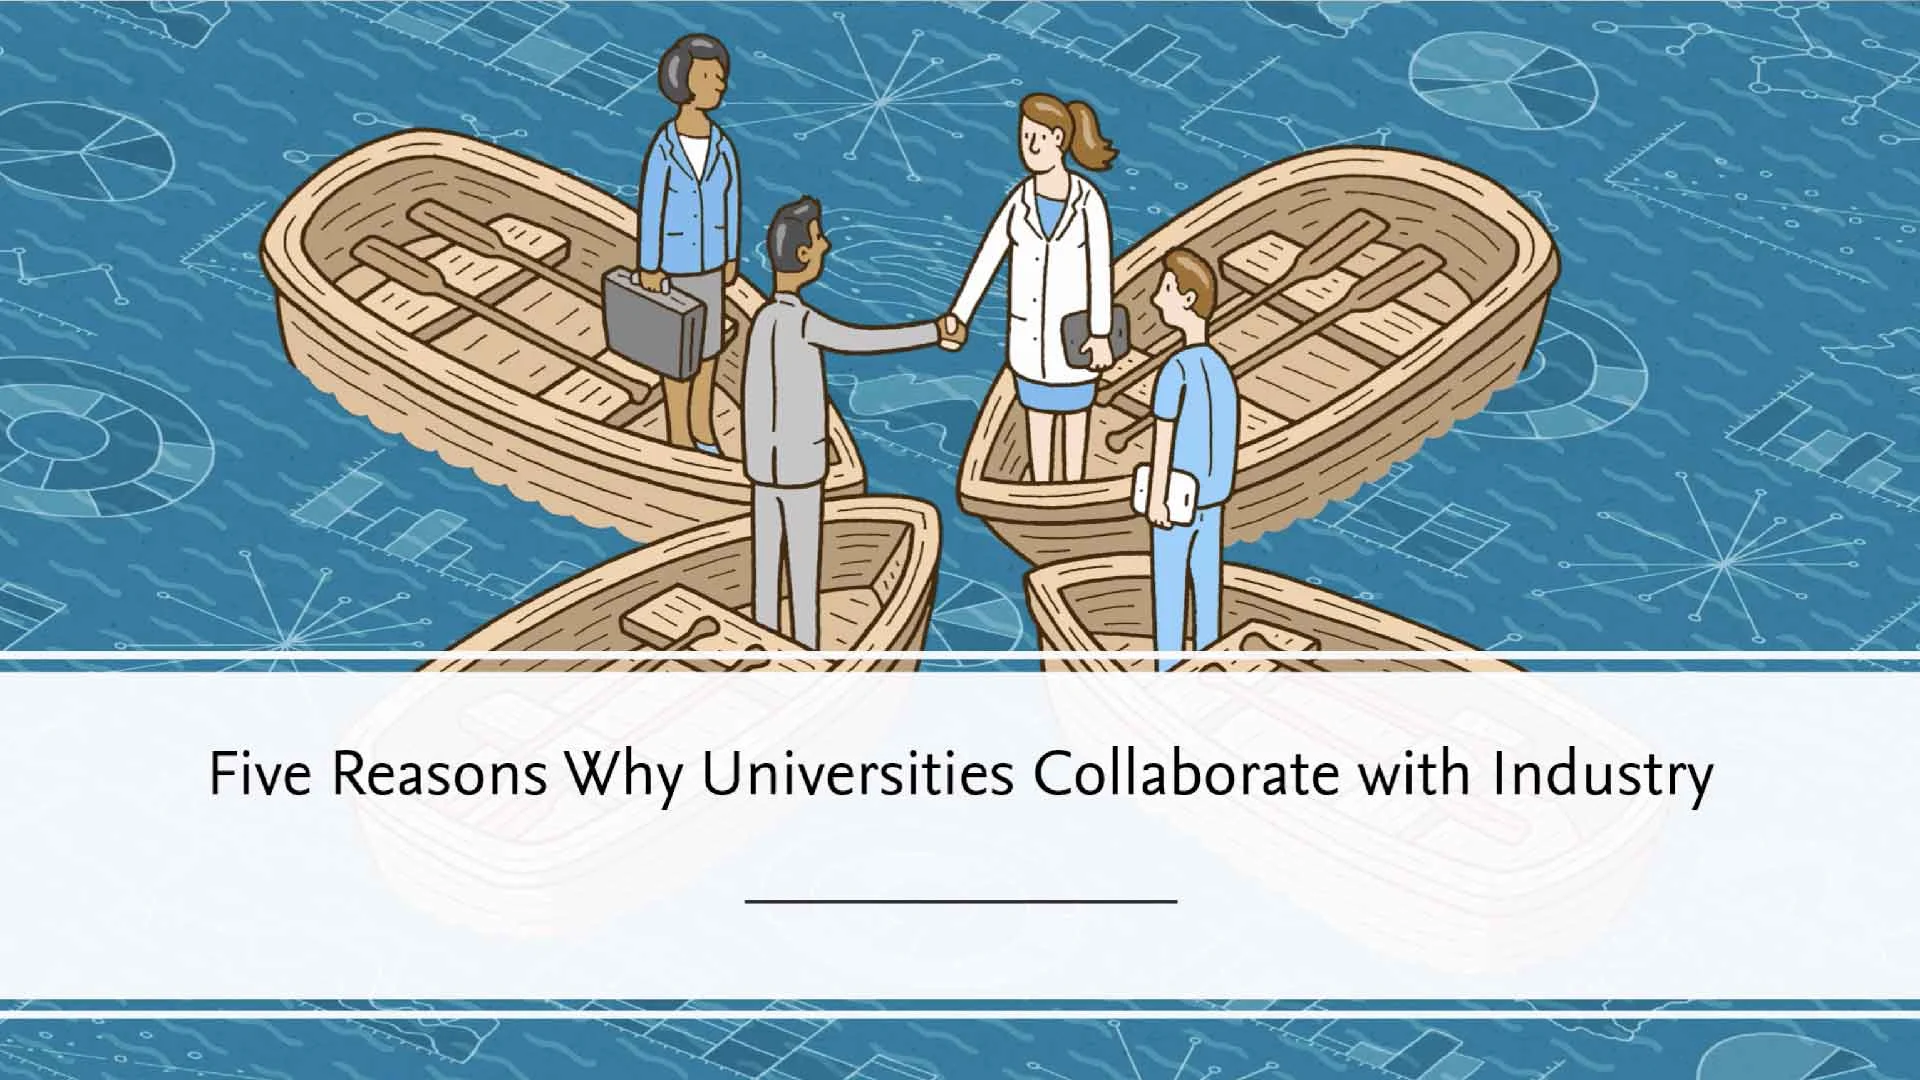 Five reasons universities collaborate with industry